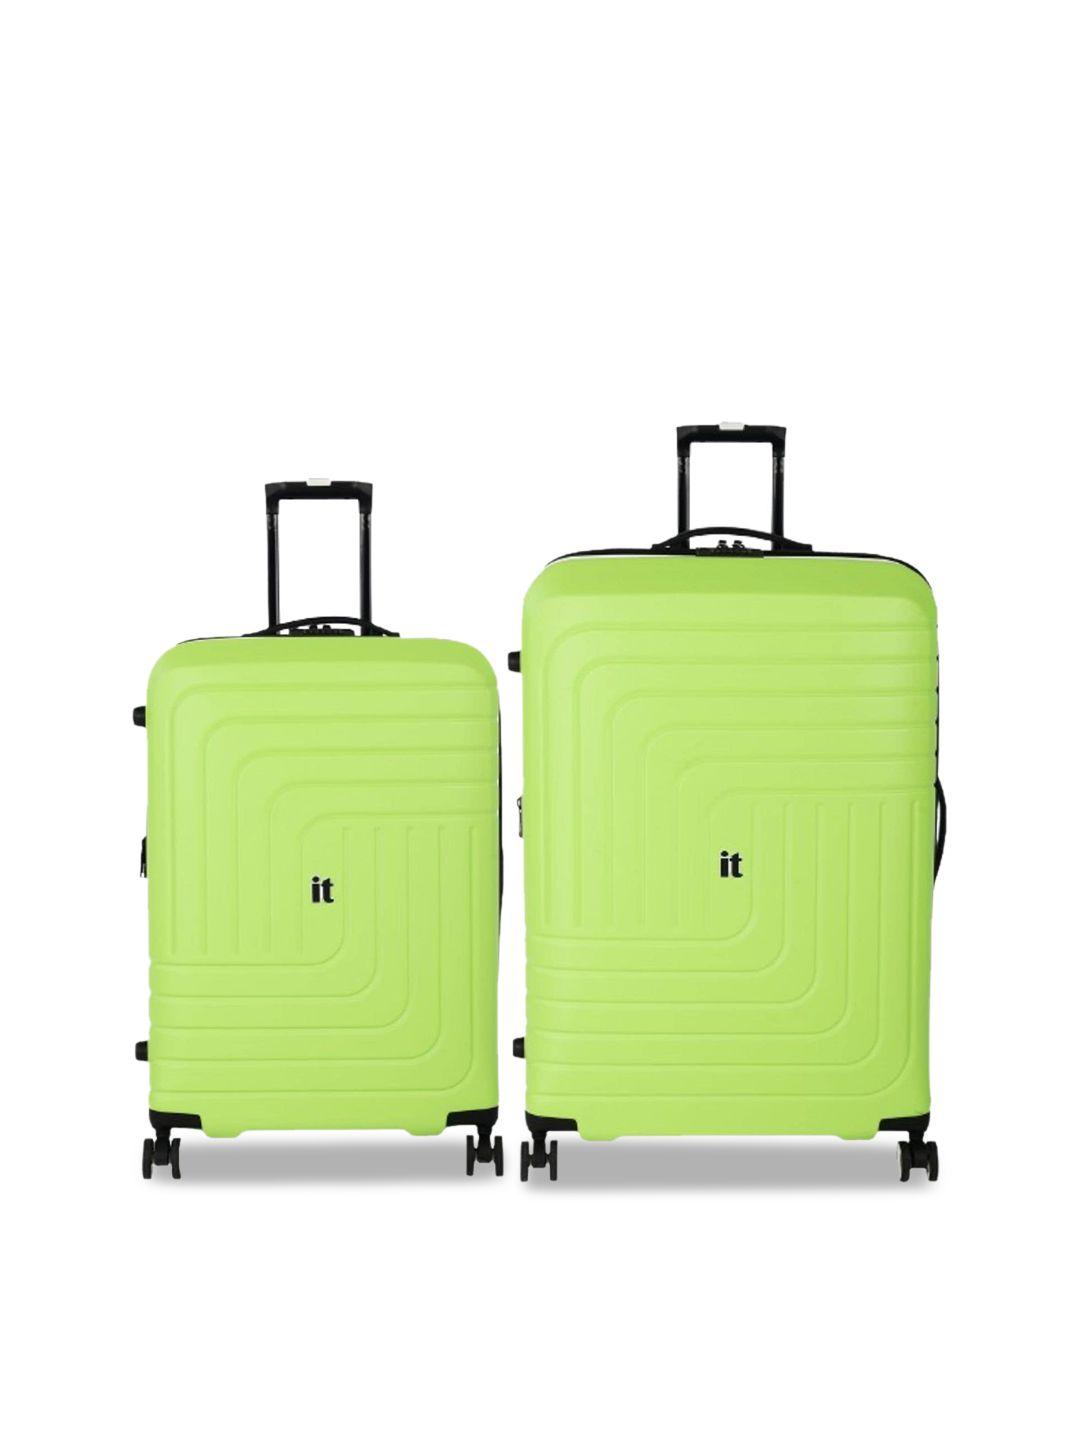 it luggage set of 2 convolved hard sided trolley bag -159.0 l